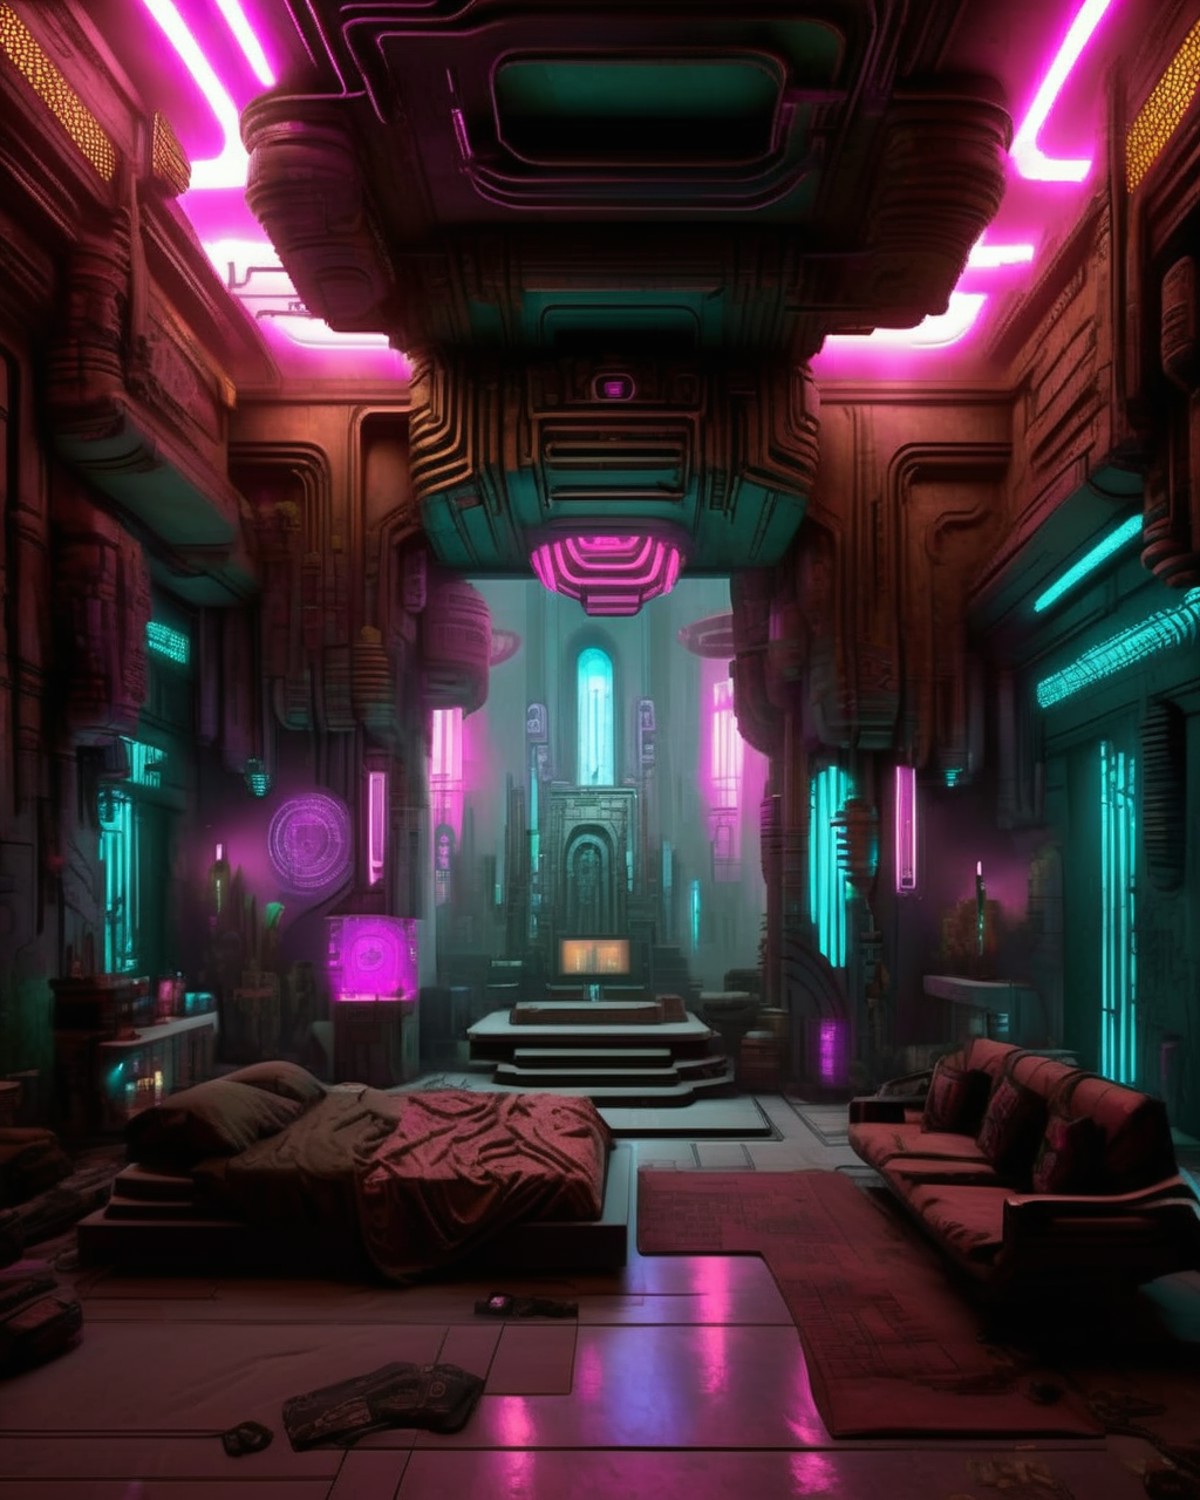 (a cyberpunk interior design ), Mind-melding temple, a sacred space where psionic practitioners commune through shared con...